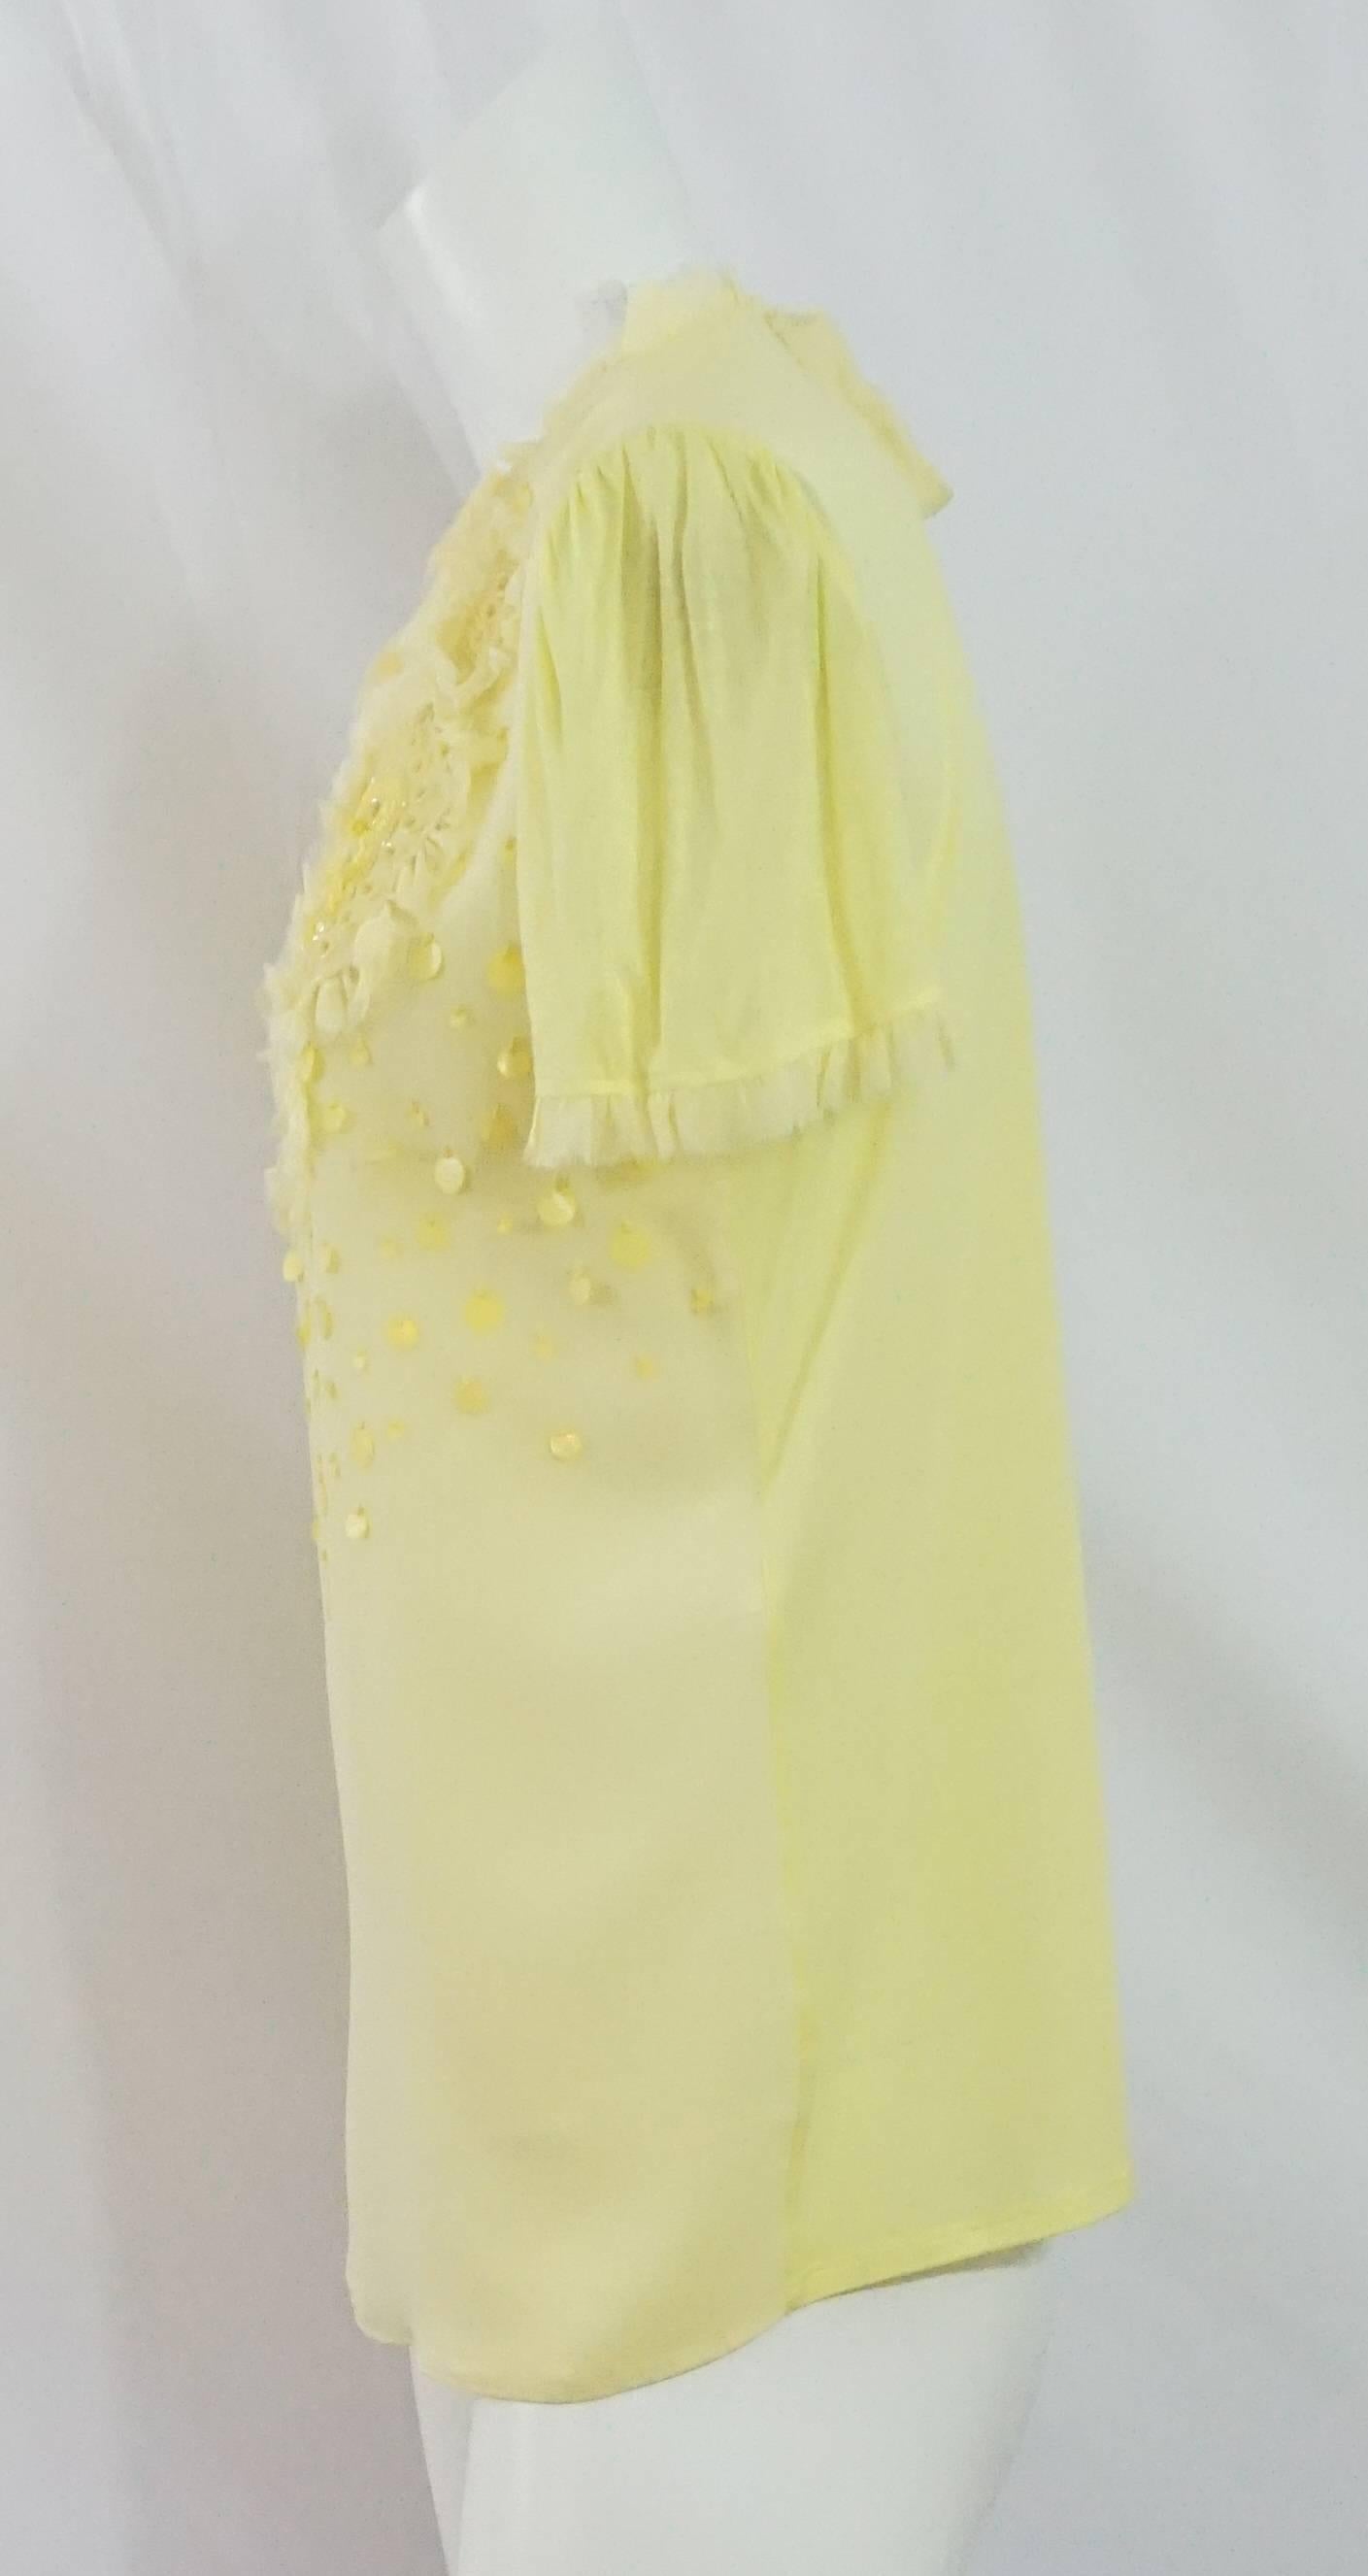 Emilio Pucci Yellow Cotton & Silk Beaded Short Sleeve Top - 10. This top is gorgeous and perfect for warm weather! It features an embellished front with geometric beading and ruffles, hanging palette sequins, a silk front, a cotton back, sleeve